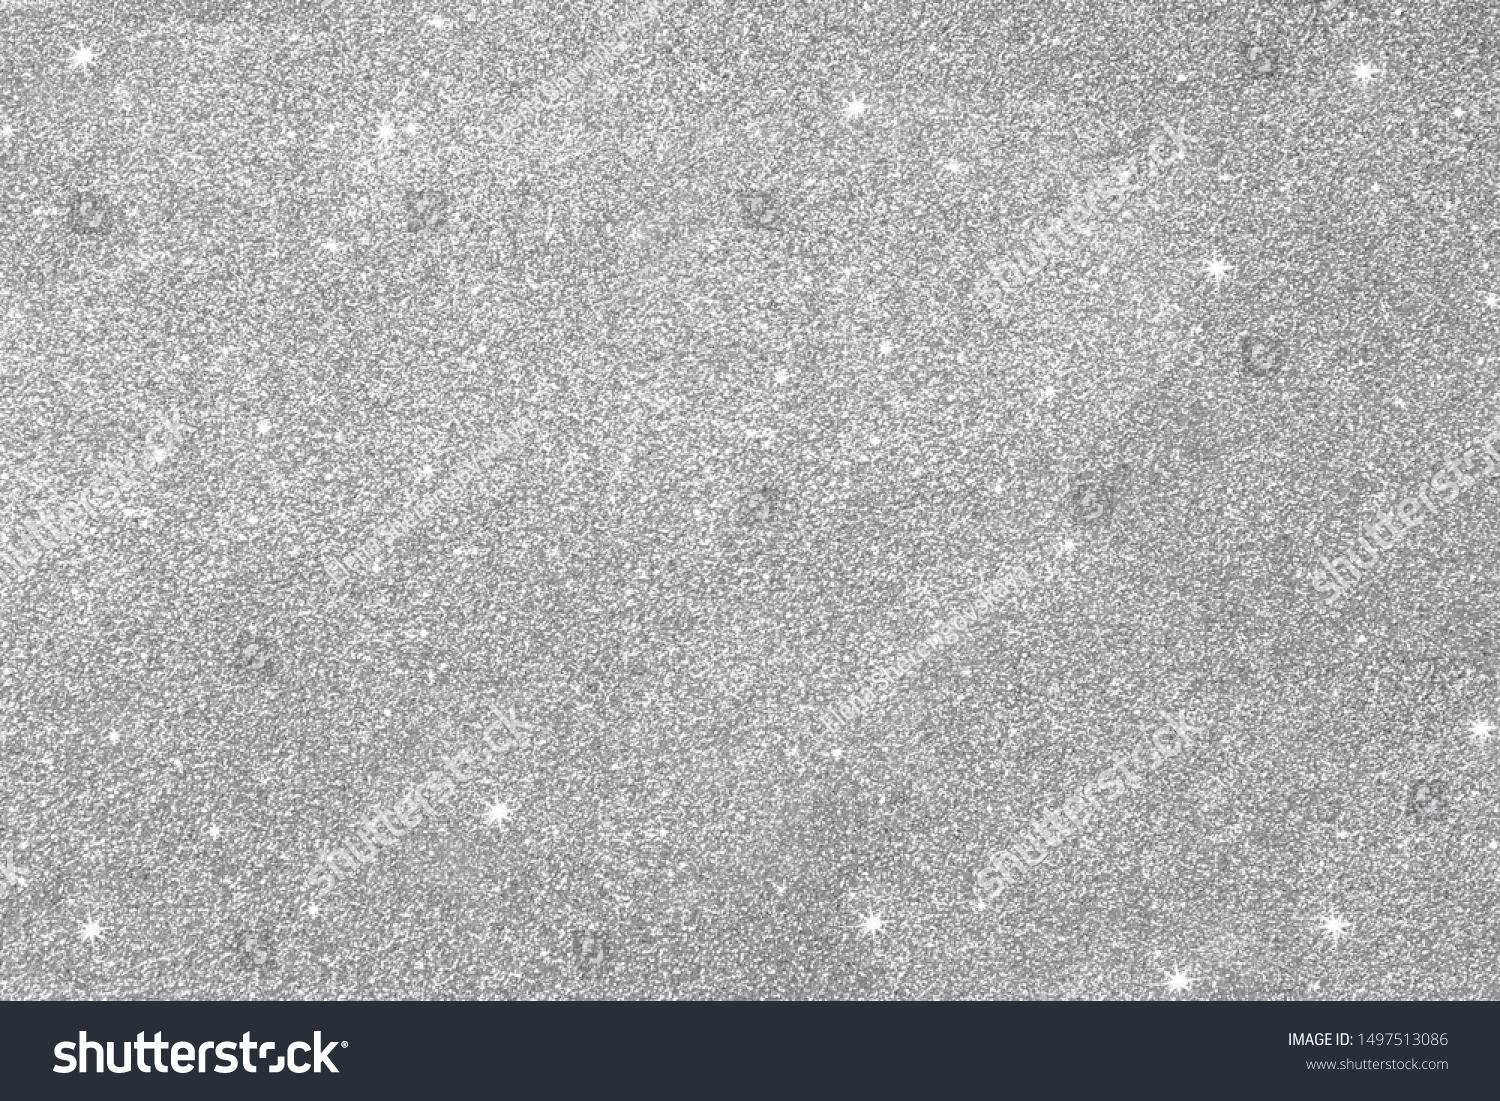 Gray silver glitter for texture or background.  Silver Seamless glitter sparkle pattern texture. #1497513086